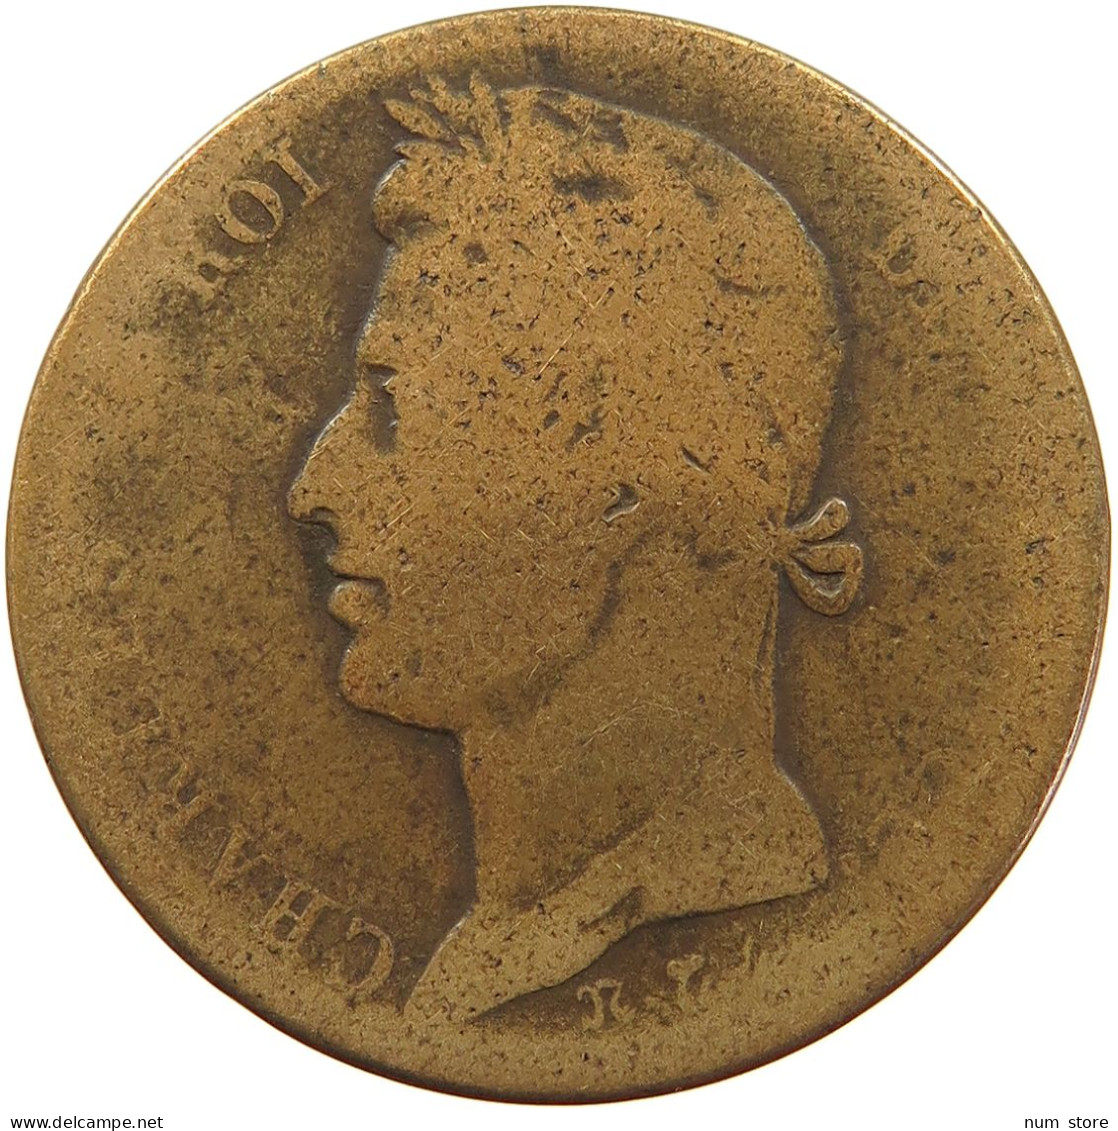 FRANCE COLONIES 10 CENTIMES 1829 Charles X. (1824-1830) #a083 0469 - French Colonies (1817-1844)